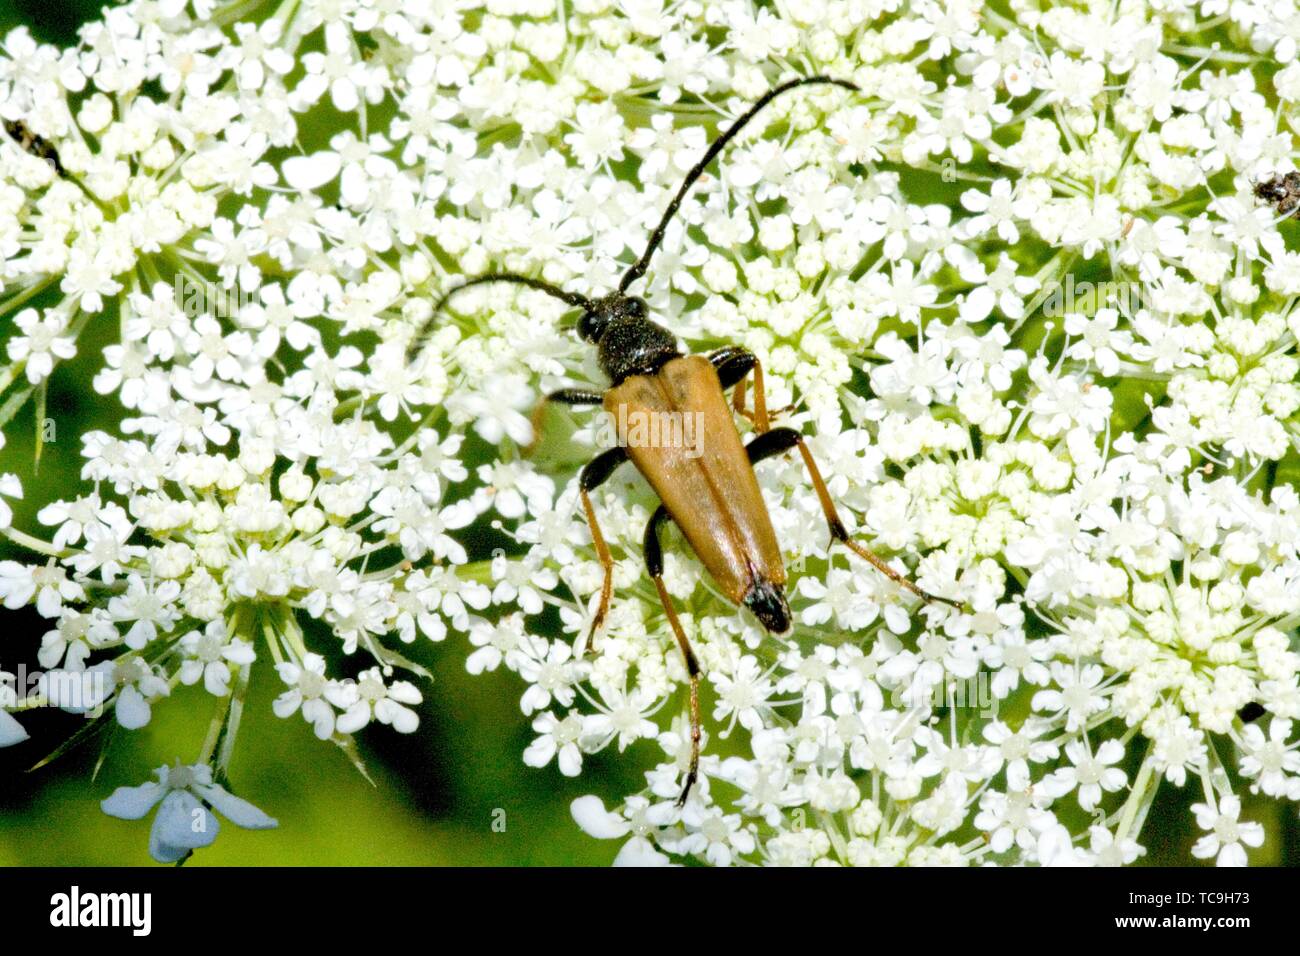 Longhorn Beetle, Anastrangalia dubia. Longhorn beetle with long narrow body with chestnut elytra that are sharply tapered. Size: 8-16mm. Found on Stock Photo